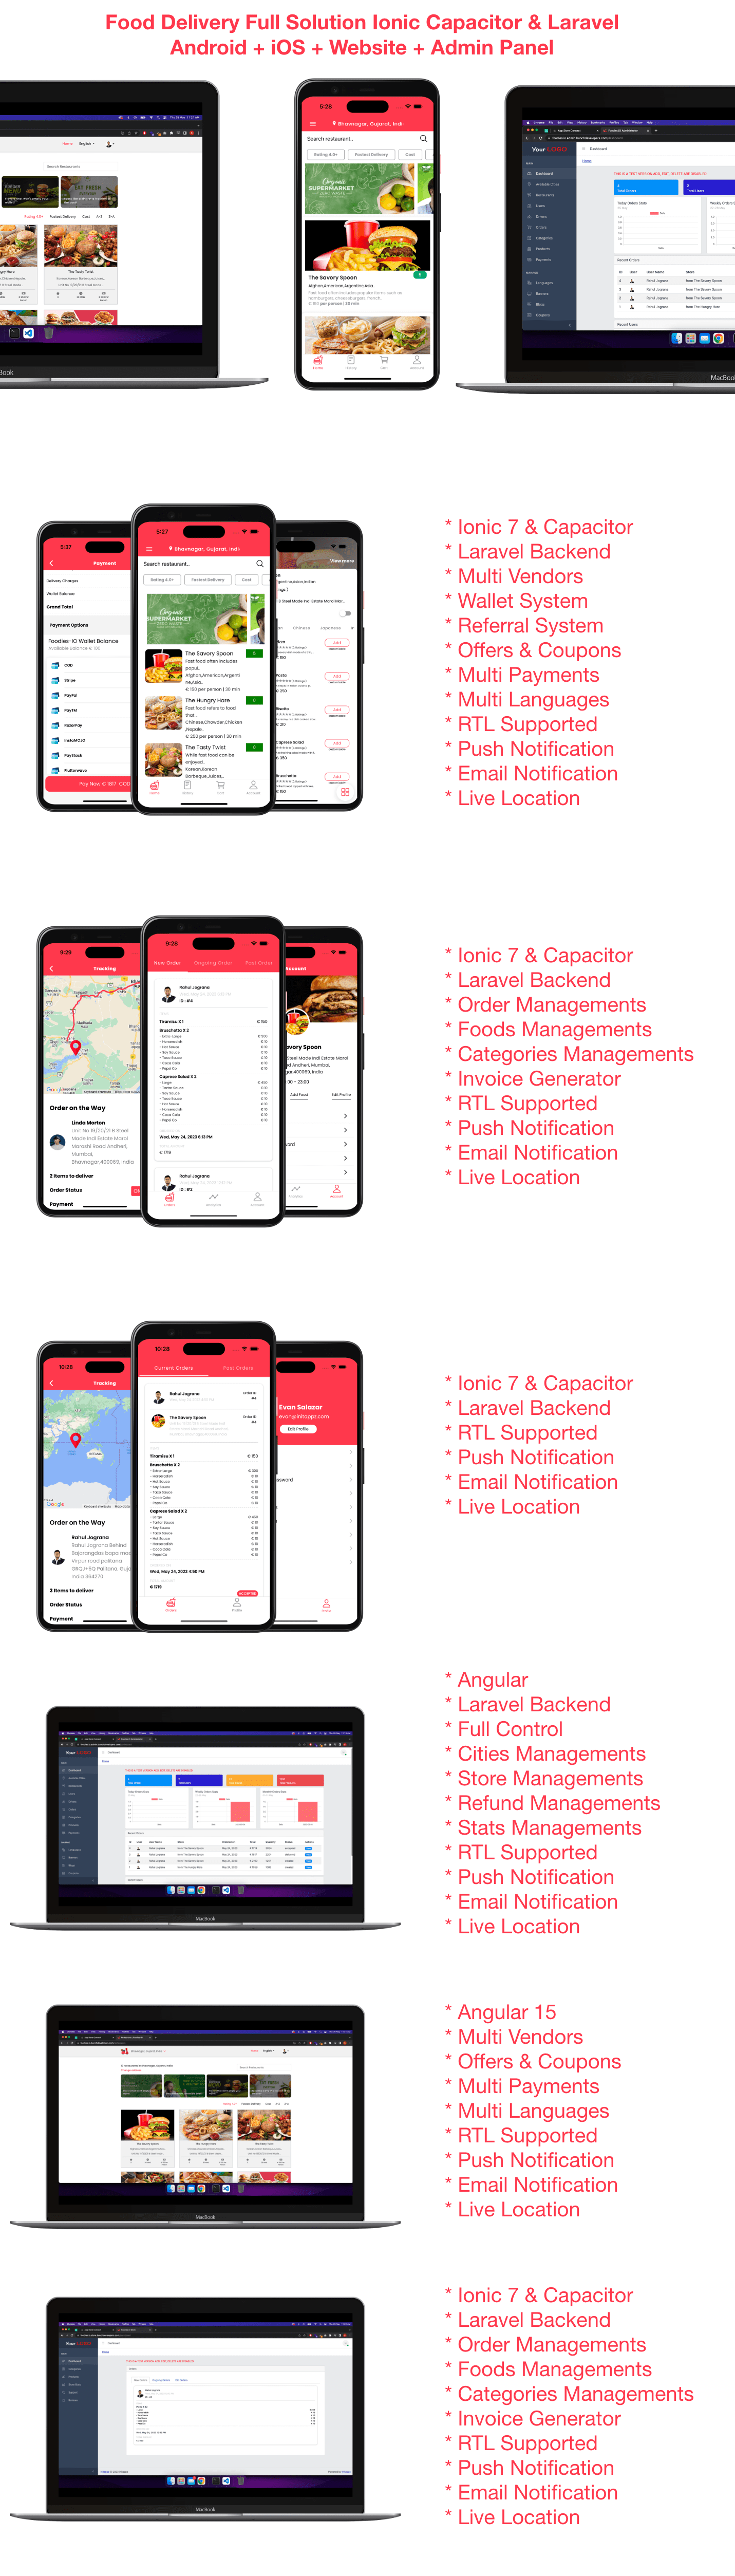 Food Delivery Multi Restaurant Ionic 7 + Laravel (Android + iOS + Website + Admin) - 2